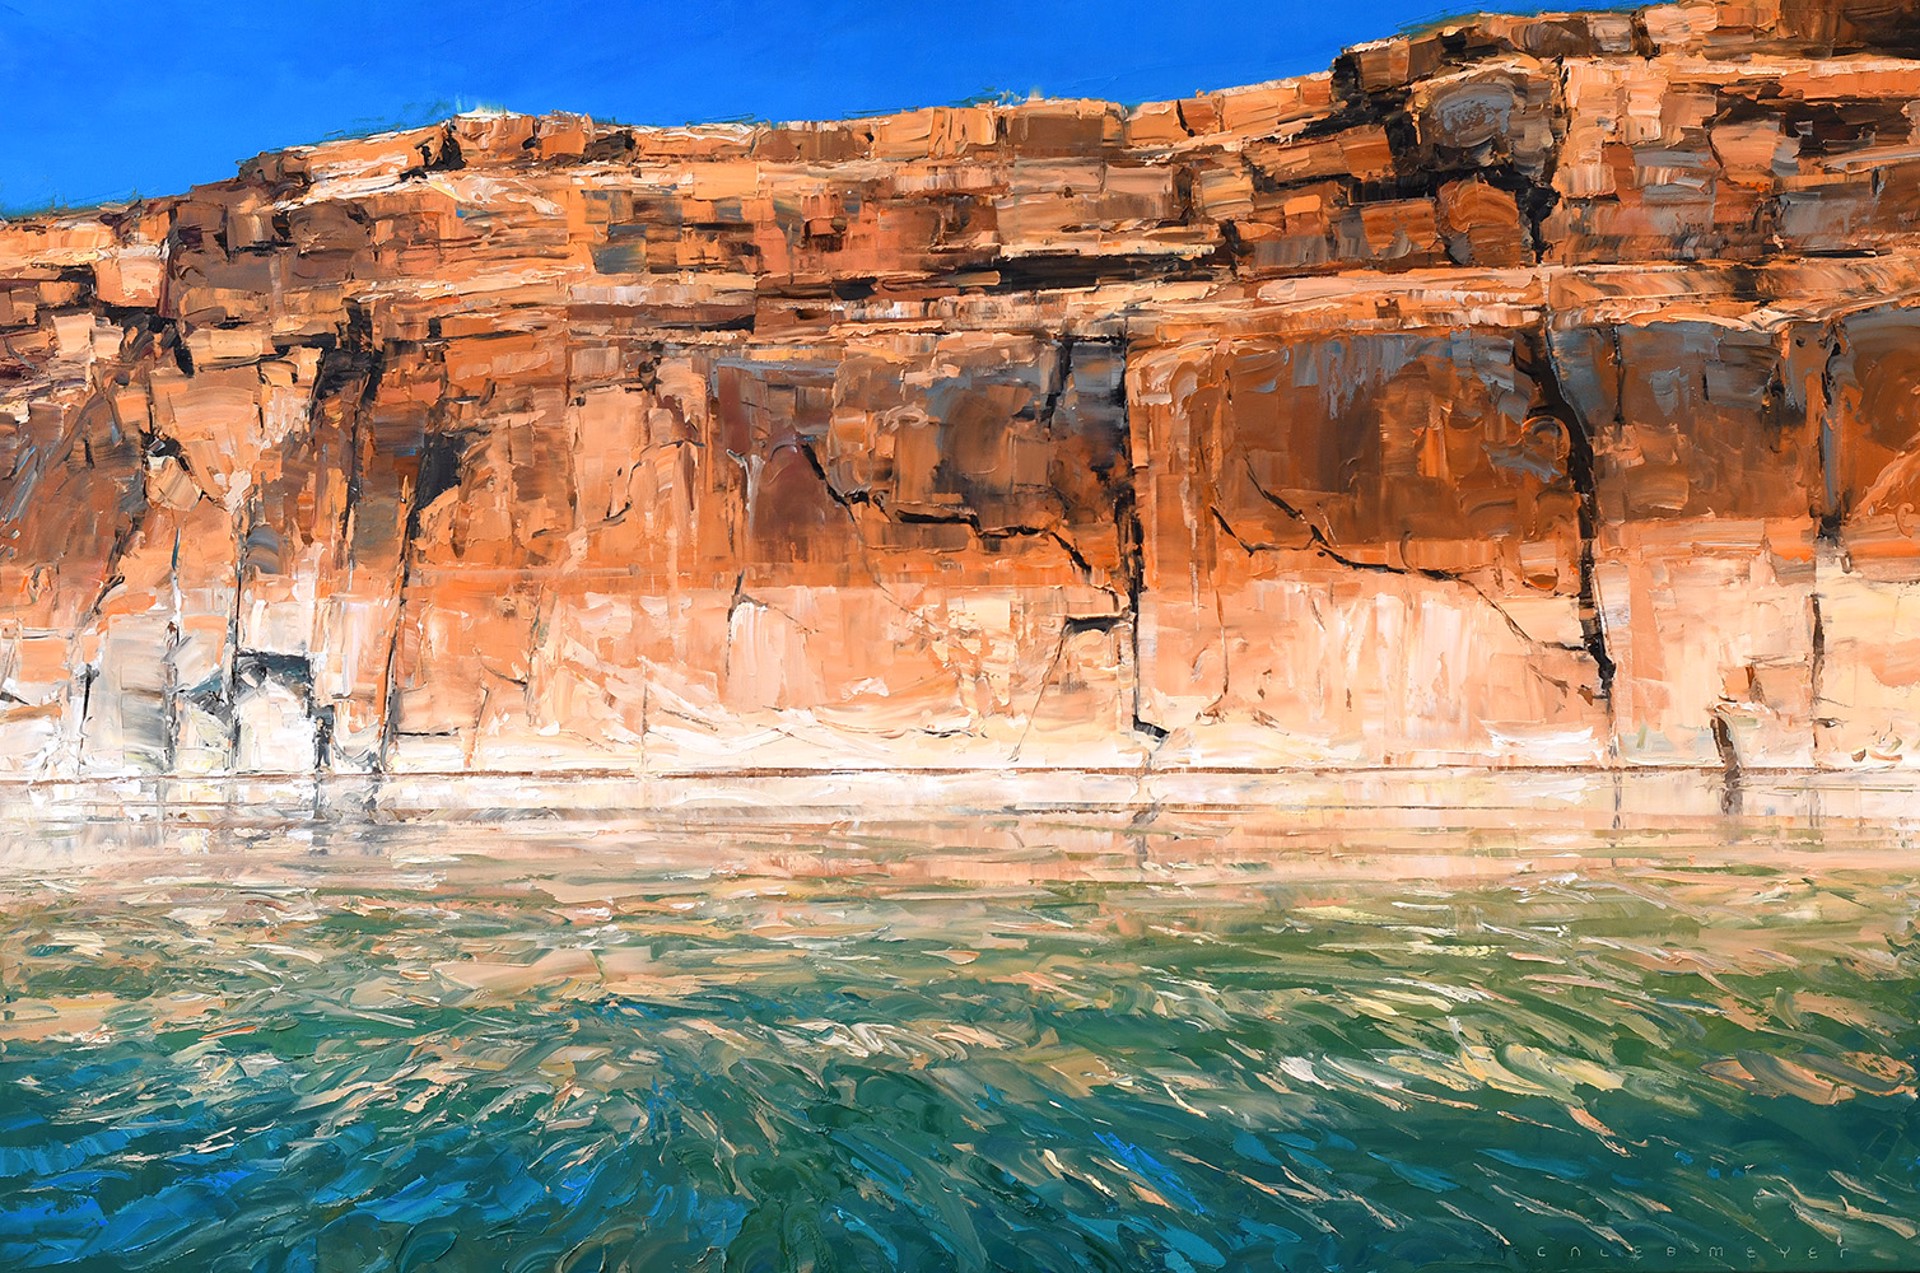 Desert Lake Oil Painting By Caleb Meyer Red Sandstone Rock With Blue Green Lake Water